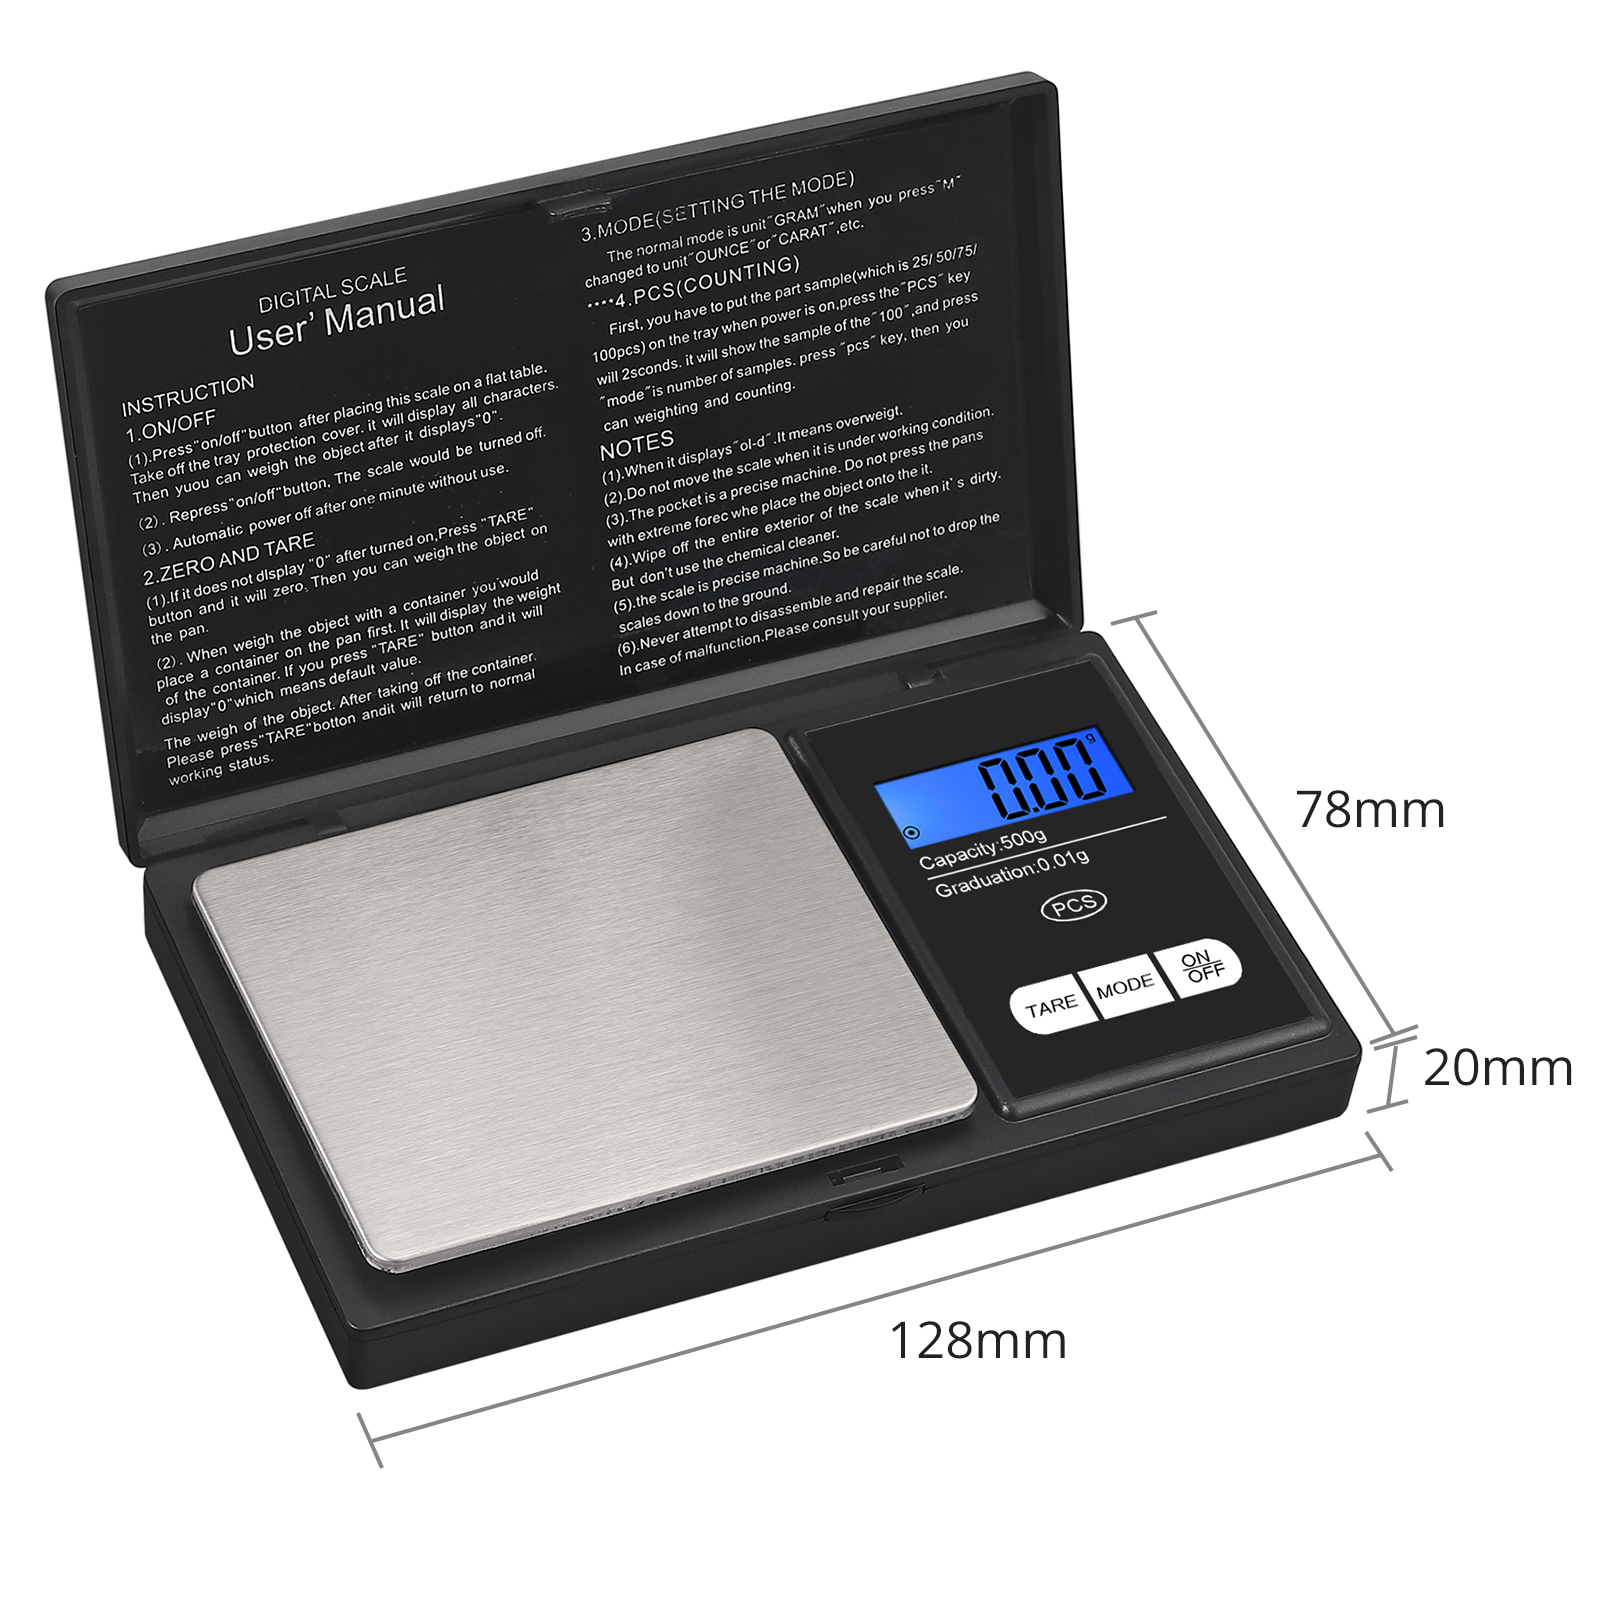 Digital Pocket Scales Gram Food Scale Capacity 500g Kitchen Portable Scale  Small Mini Cooking Scale Lab Scale